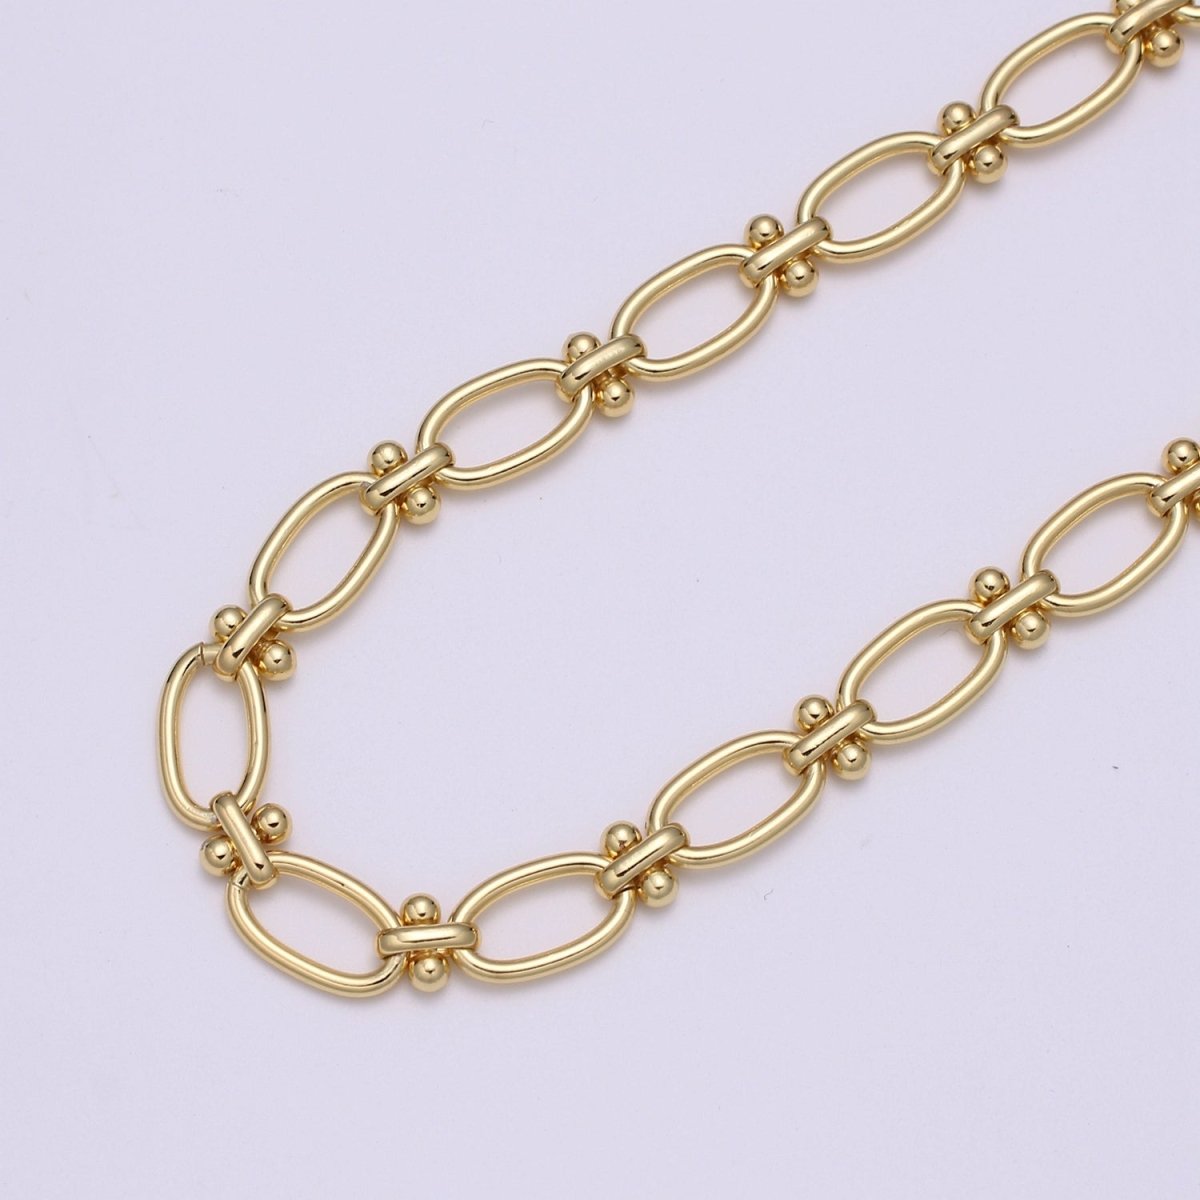 *Pre-order with MOQ of 25 yards only* Gold Oval Rolo and Cross Chain by Yard, Figure 8 Oval Link Chain, Fancy Wholesale Bulk Roll Chain For Jewelry Making, Width 9.4mm, 24K Gold Filled UNIQUE CABLE For Jewelry Component | ROLL-491 - DLUXCA